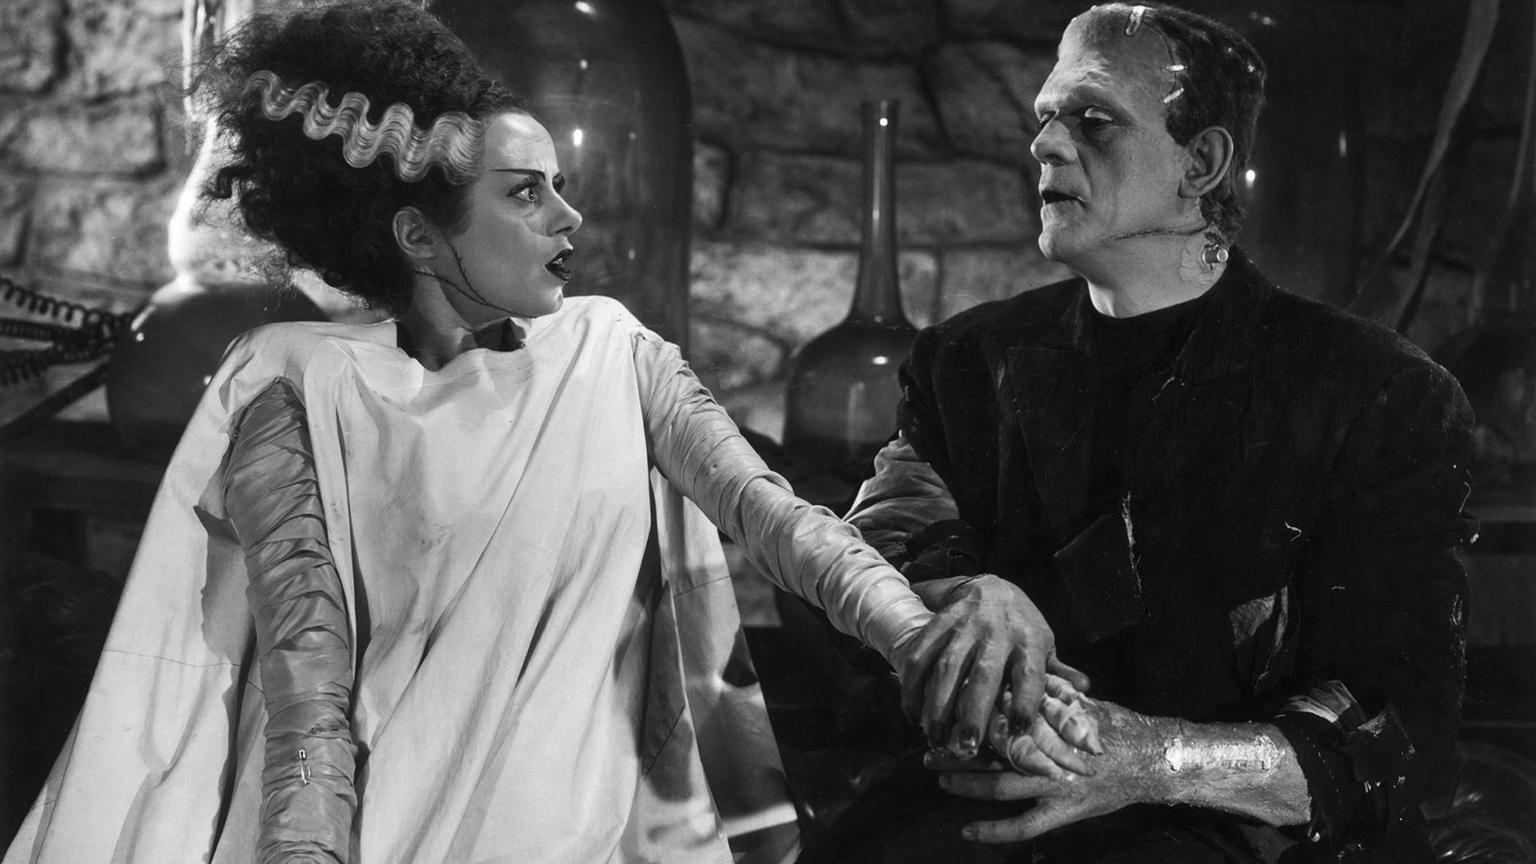 "The Bride of Frankenstein" (Courtesy of the CSO)